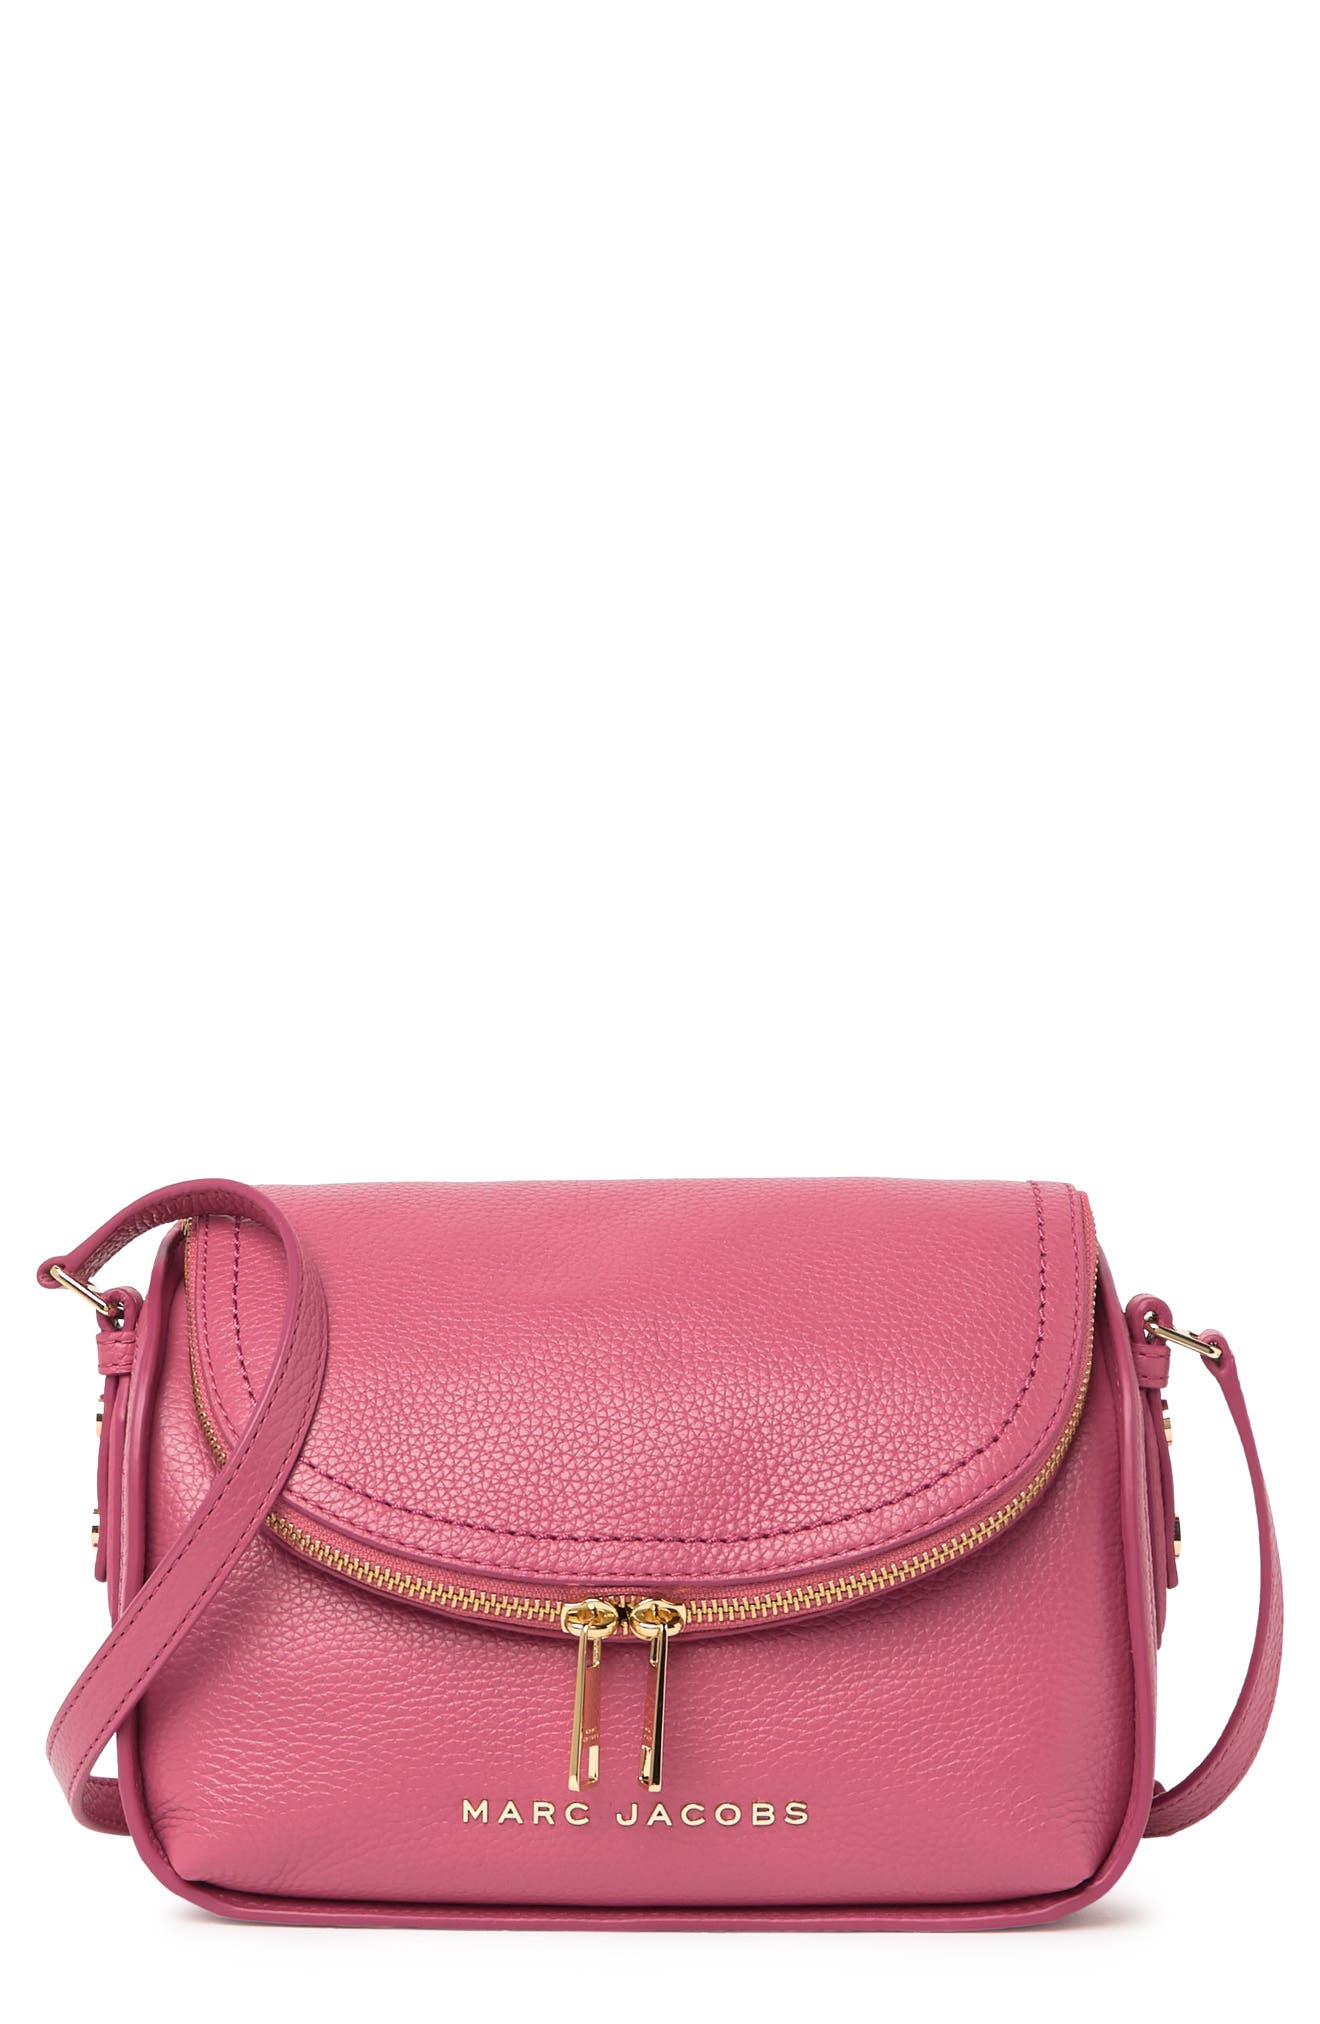 Marc Jacobs The Groove Leather Mini Messenger Bag In Dark Pink1